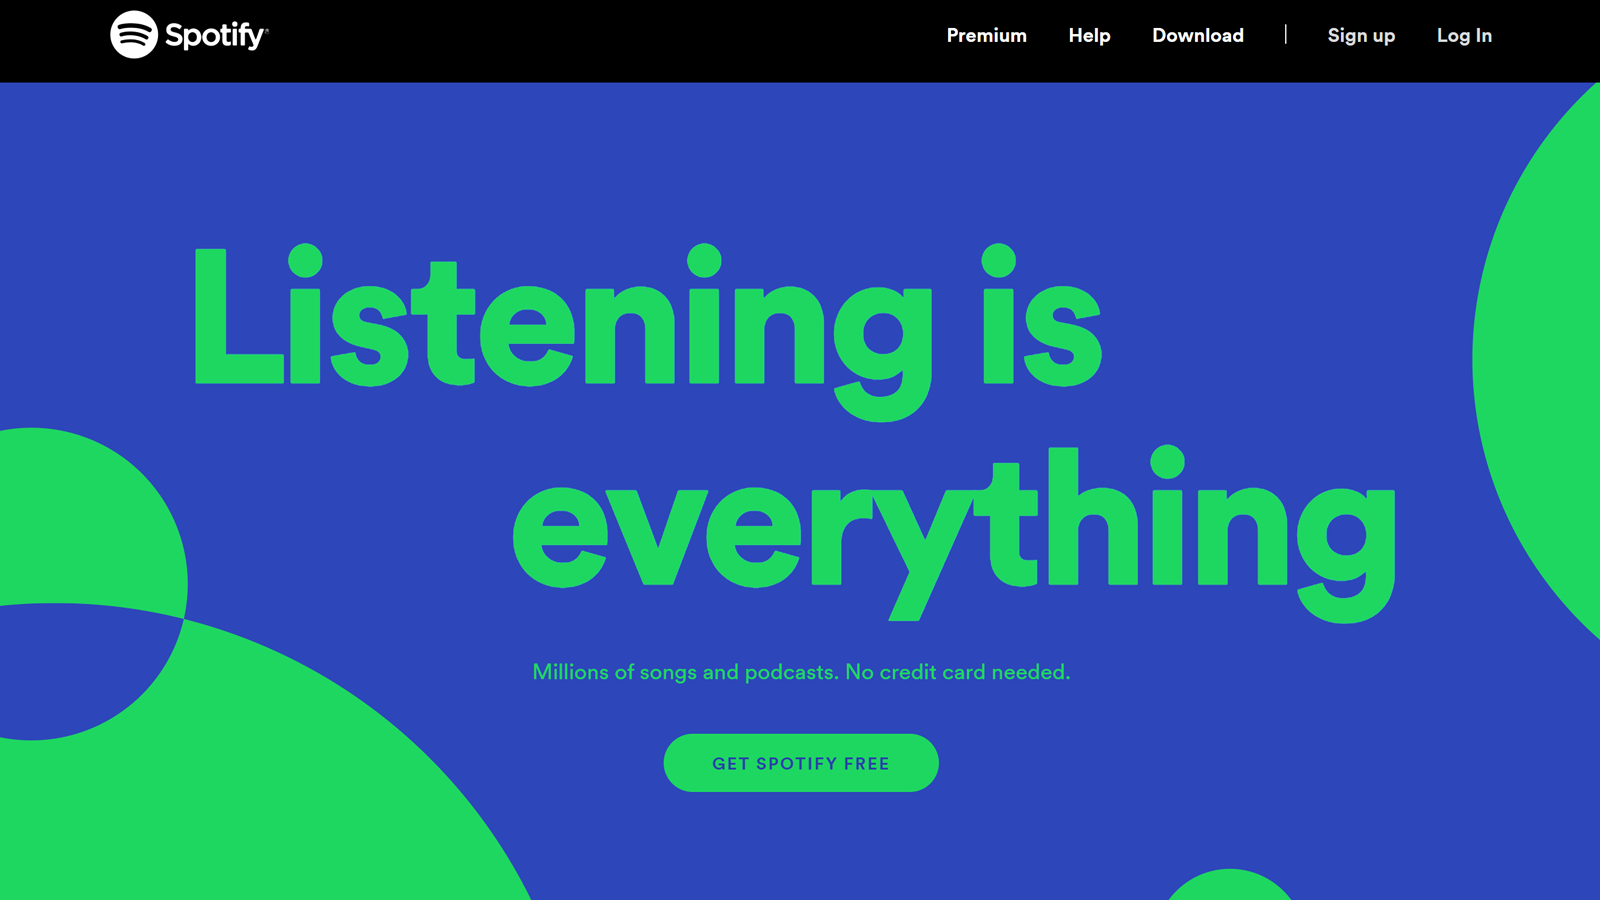 Spotify website with green and blue text and designs saying &quot;listening is everything&quot;